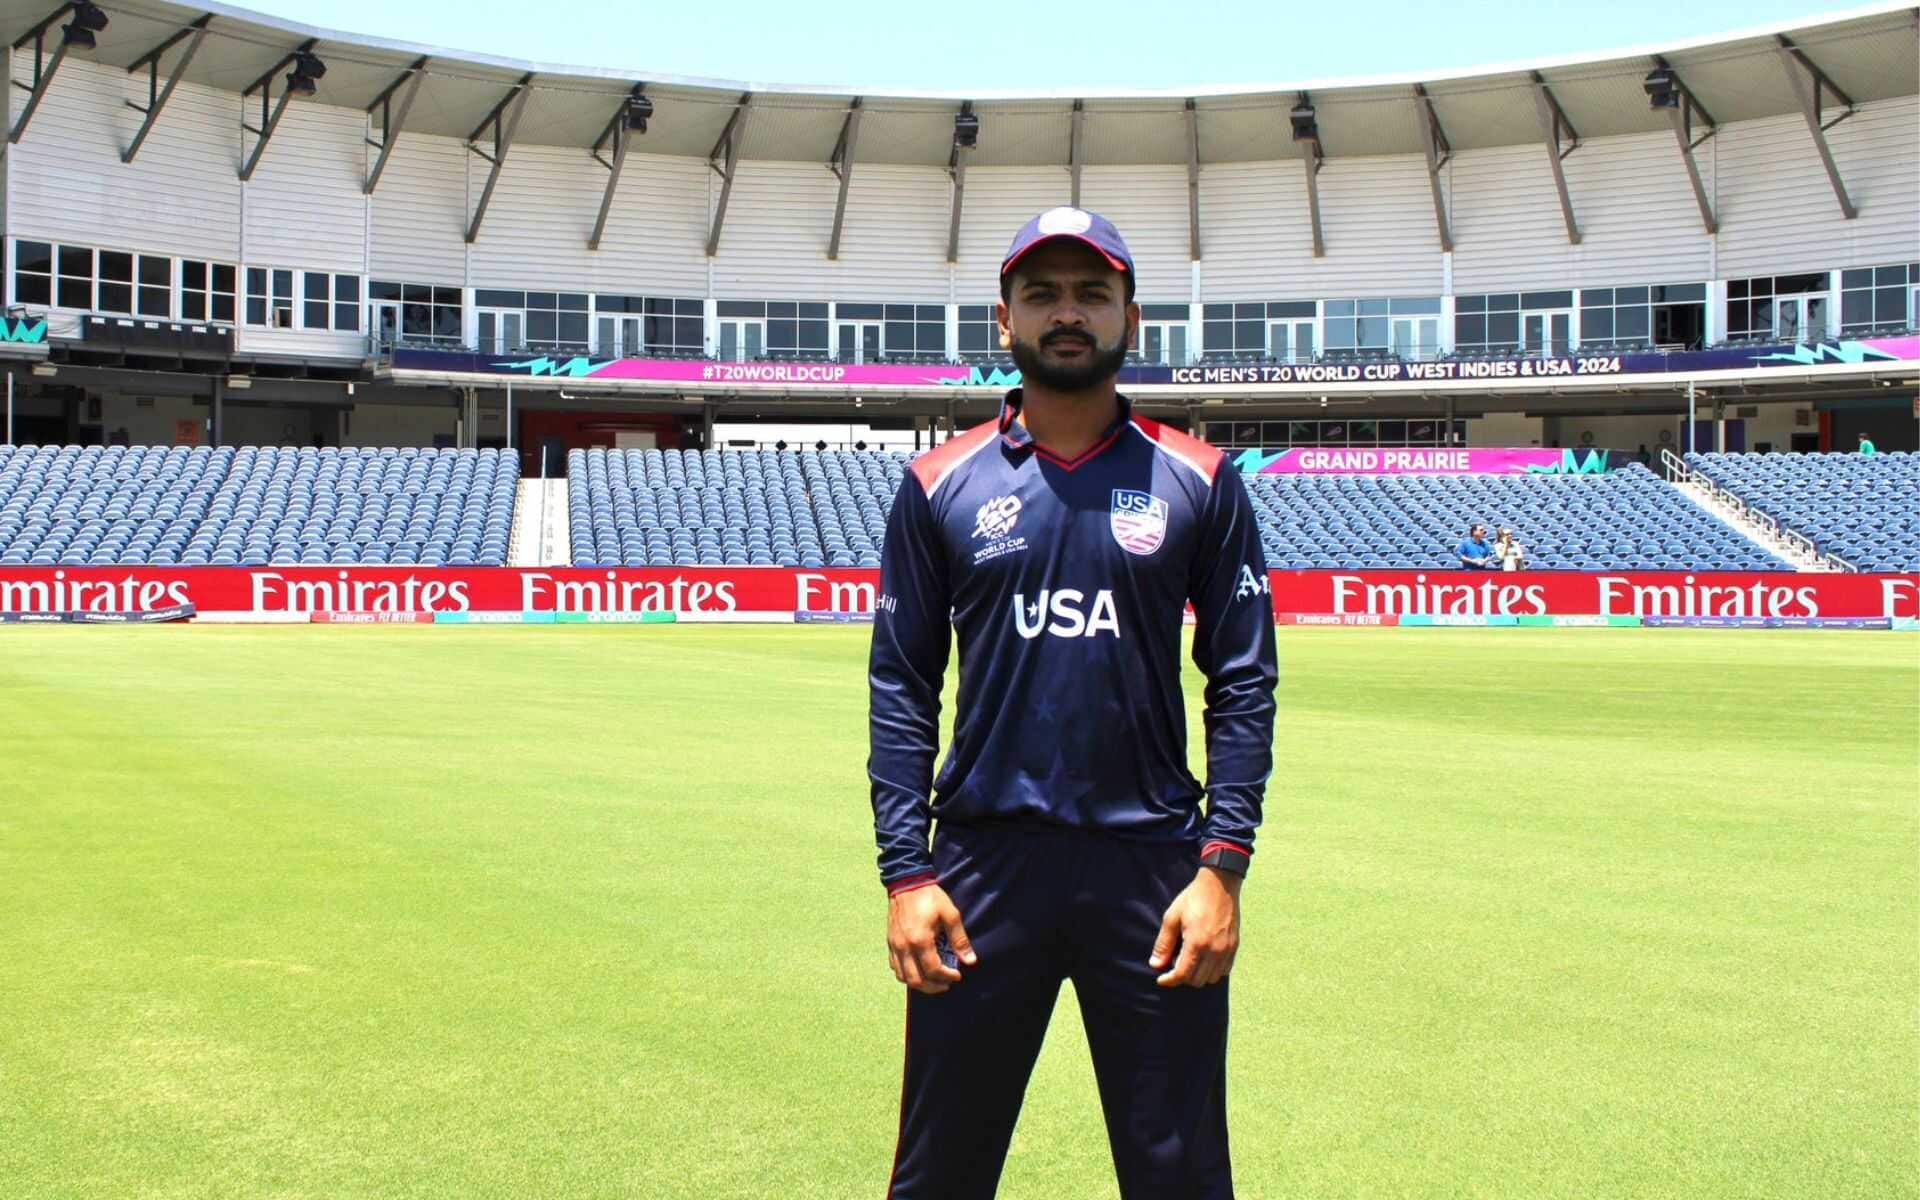 Monank Patel is set to lead USA in T20 WC 2024 (x.com)